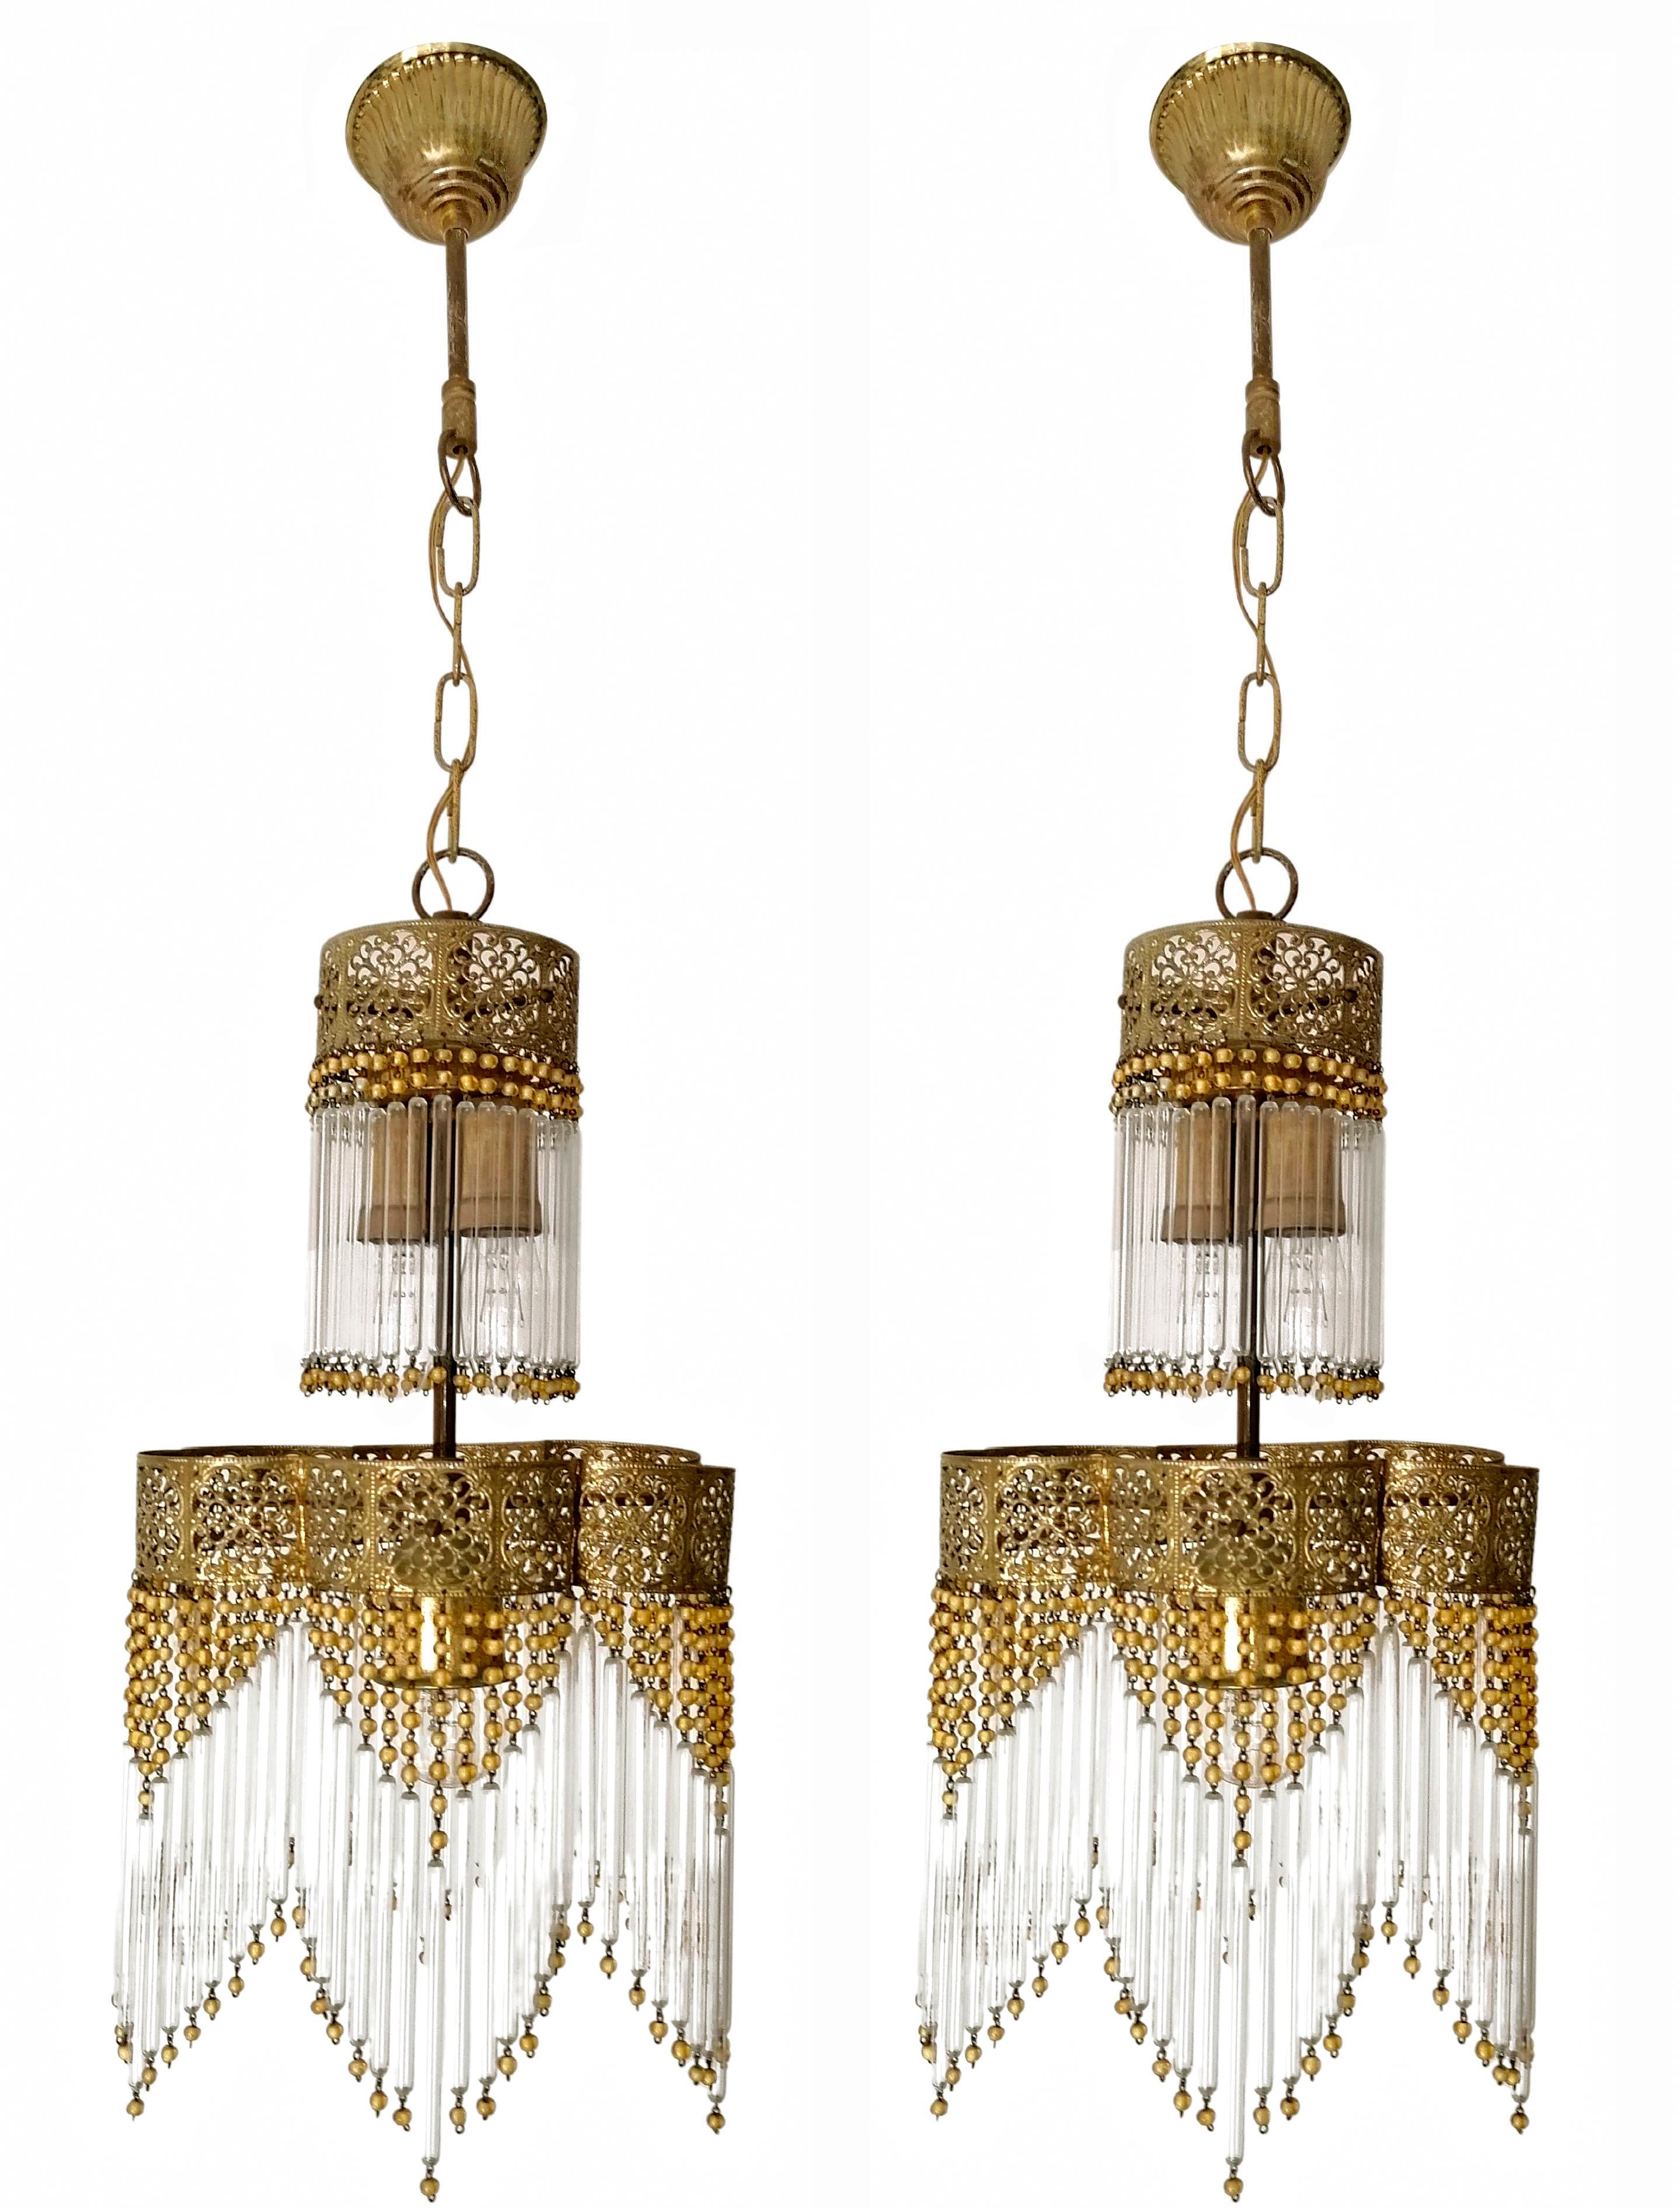 Lovely Pair of French Art Deco and Art Nouveau gilt brass three-light chandelier with clear glass rods and amber glass pearls making a gorgeous sparking lighting effect! 
Age patina.
Dimensions:
Height: 33.08 in.(chain = 6,3 in.) /84 cm (chain =